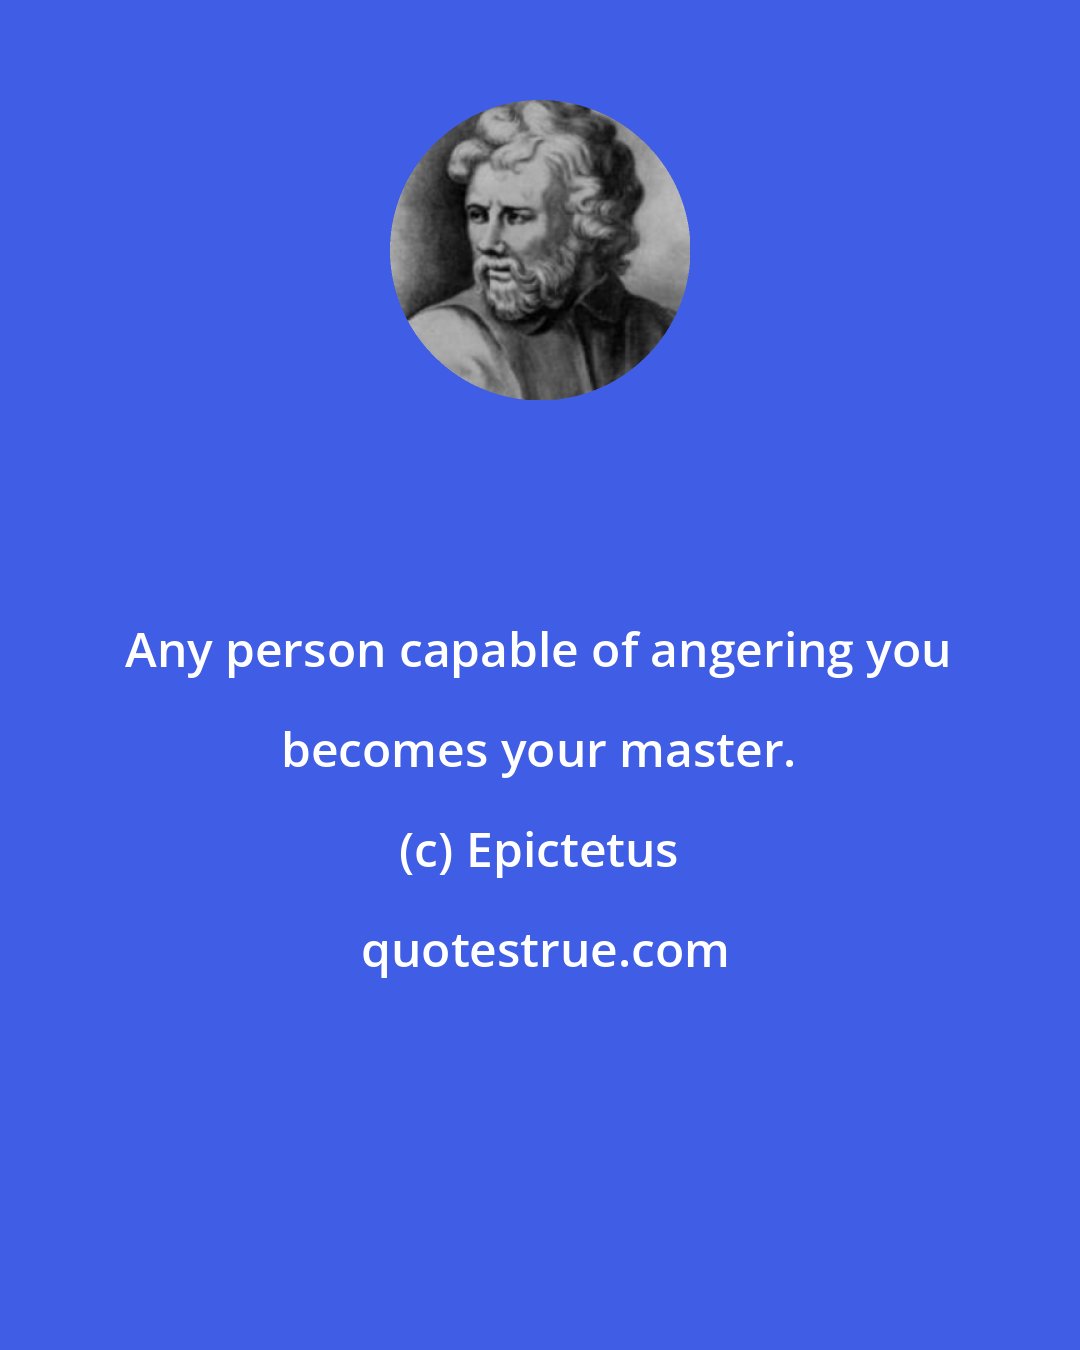 Epictetus: Any person capable of angering you becomes your master.